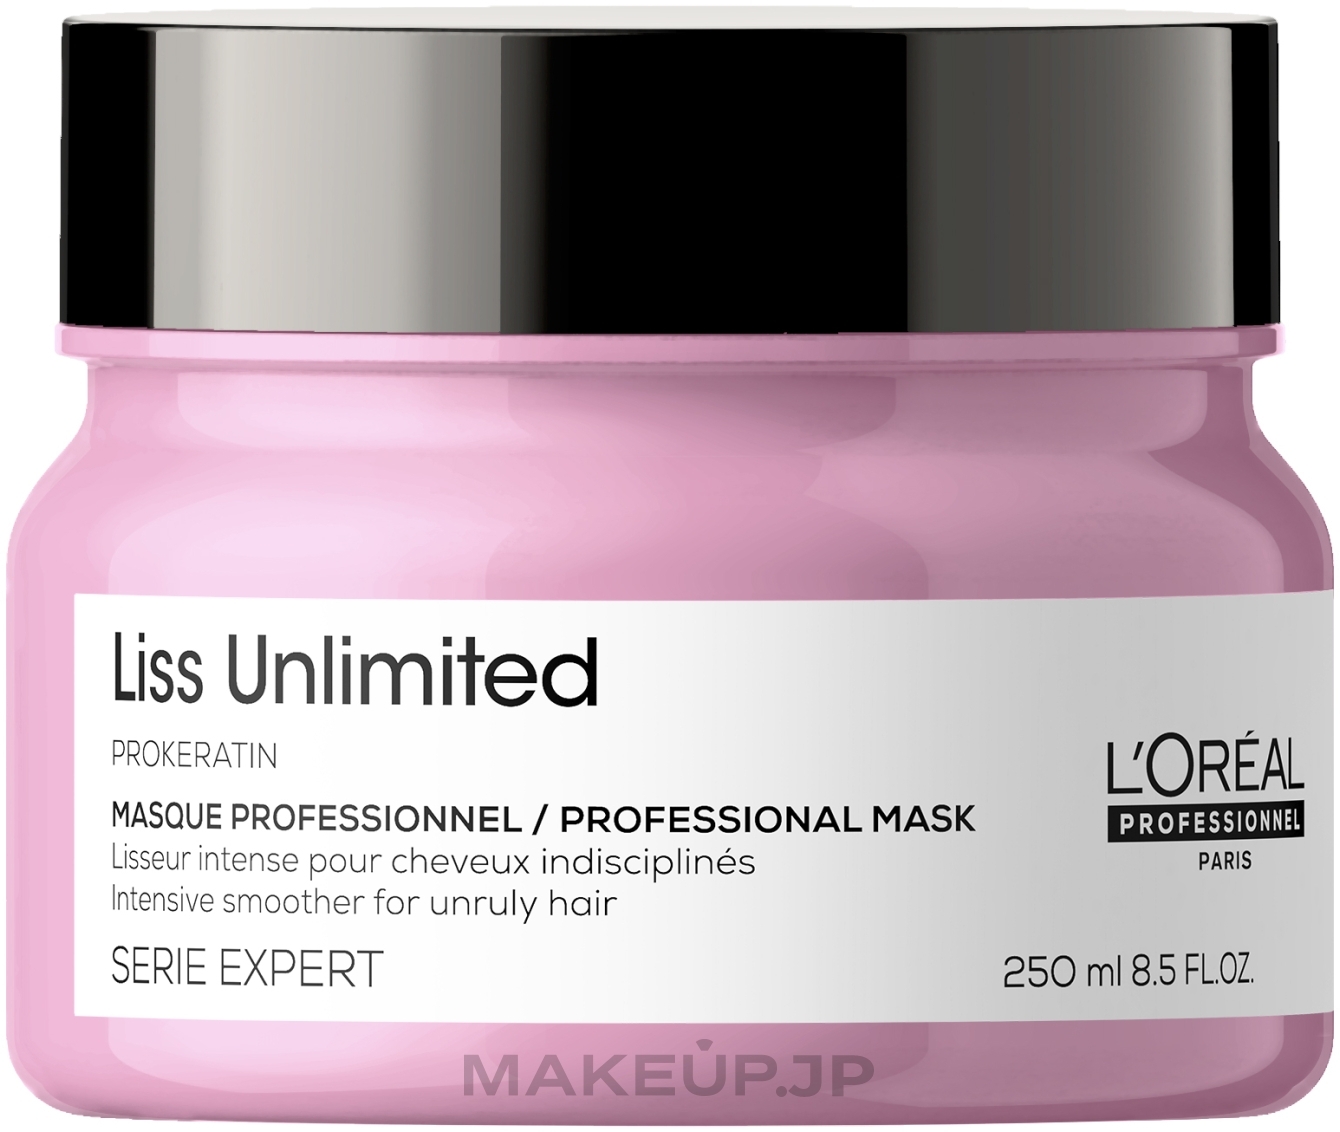 Keratin Dry & Unruly Hair Mask - L'oreal Professionnel Liss Unlimited Prokeratin Masque — photo 250 ml NEW